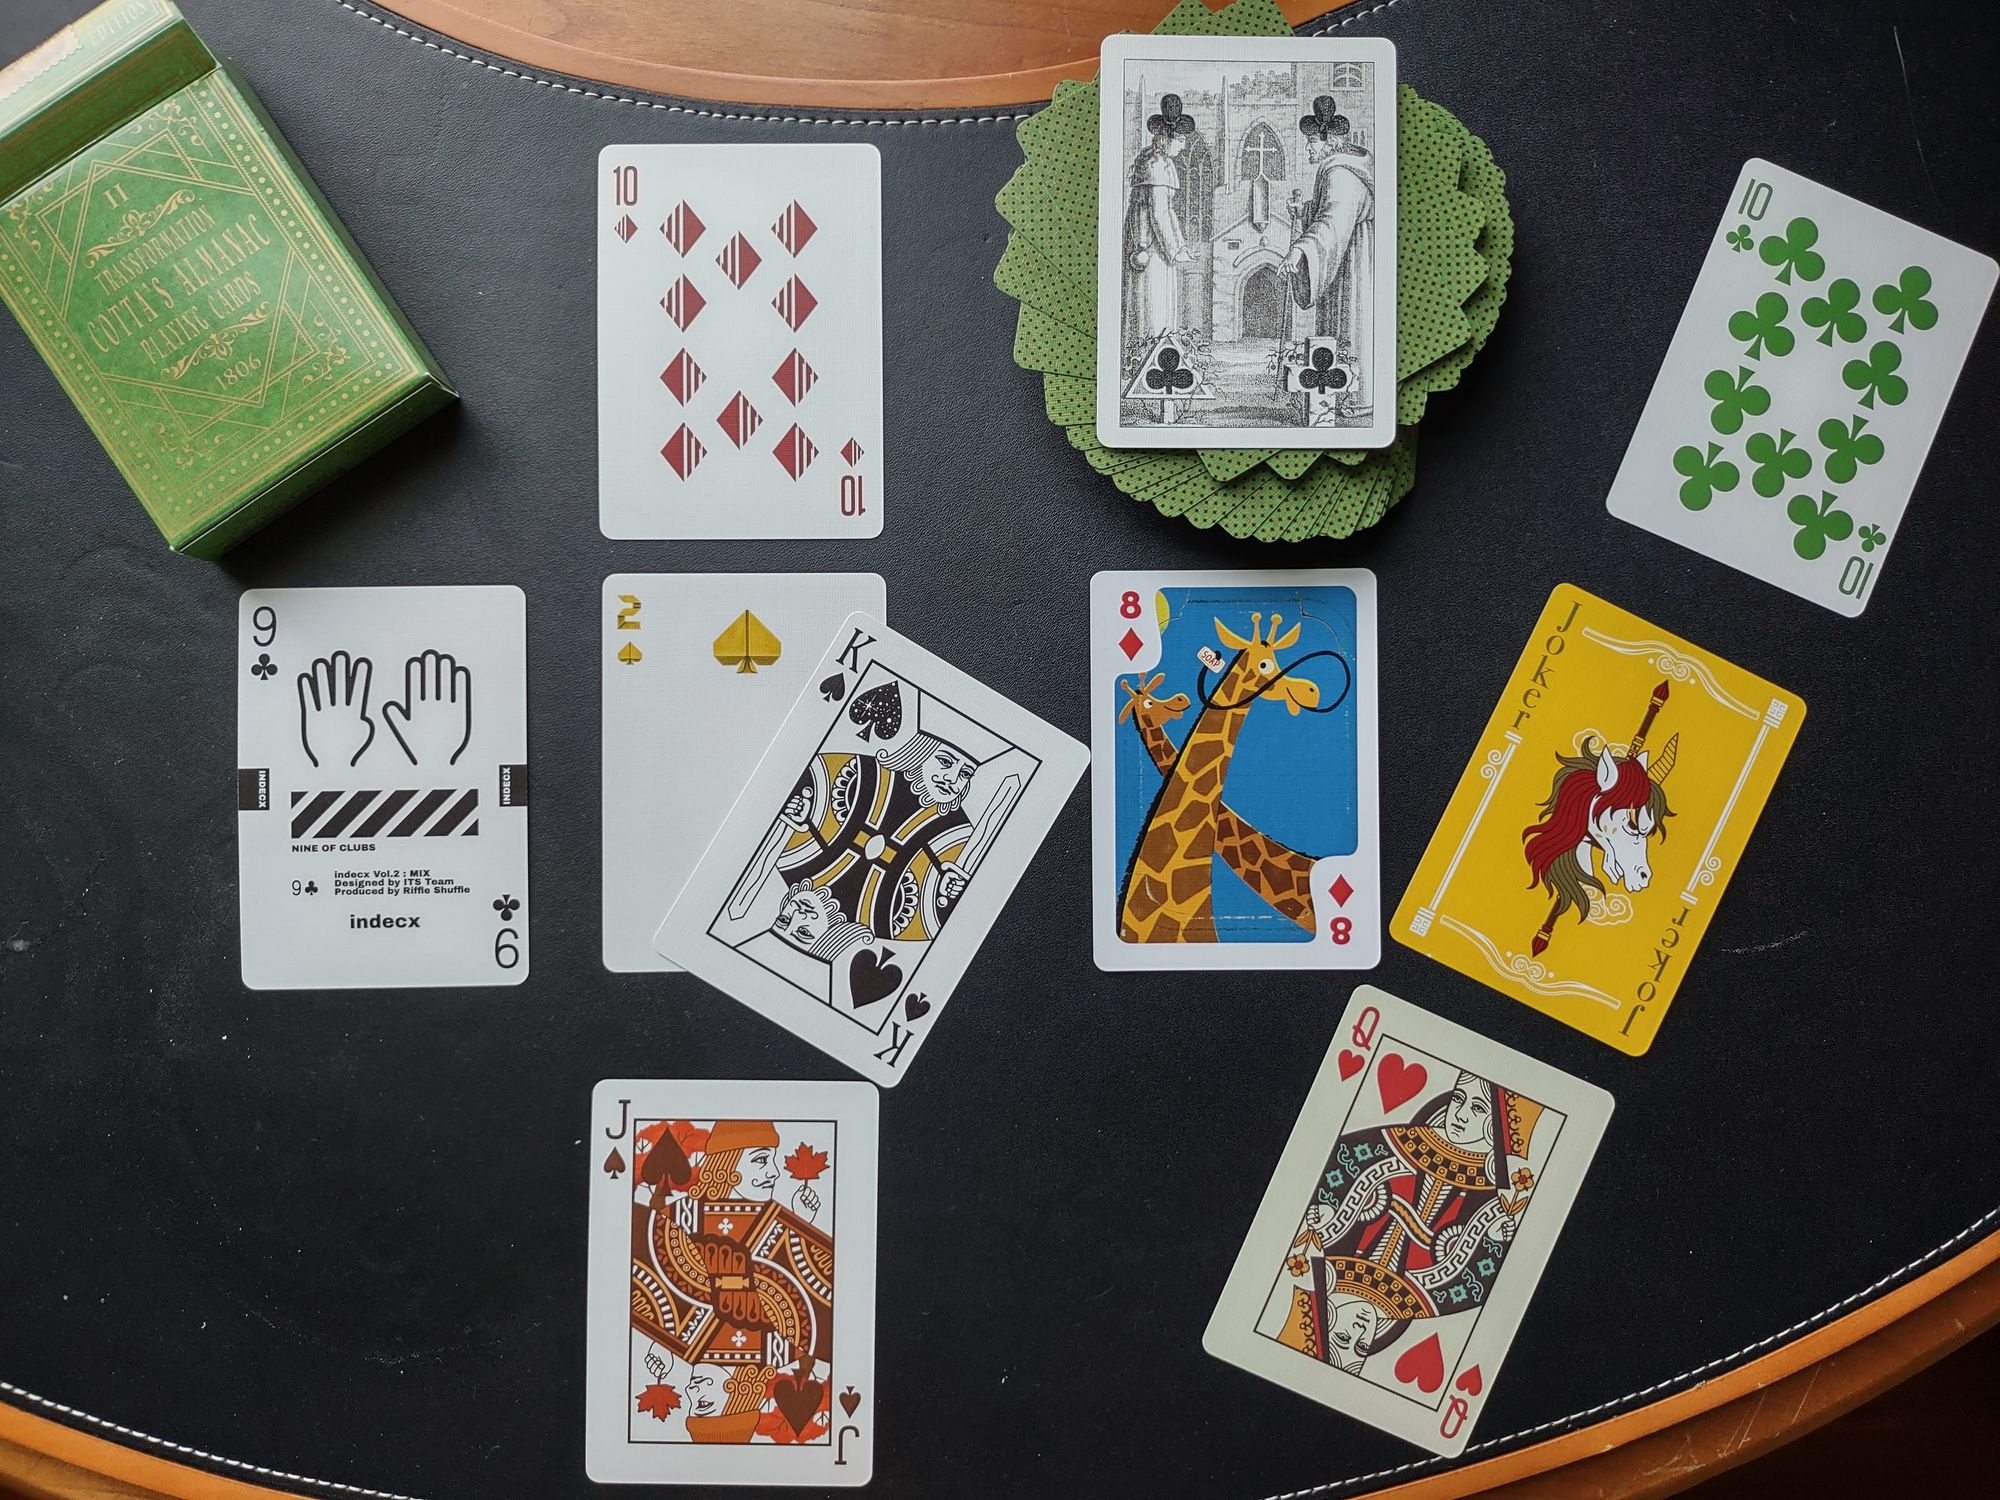 4 of clubs. From Cotta's Almanac II.